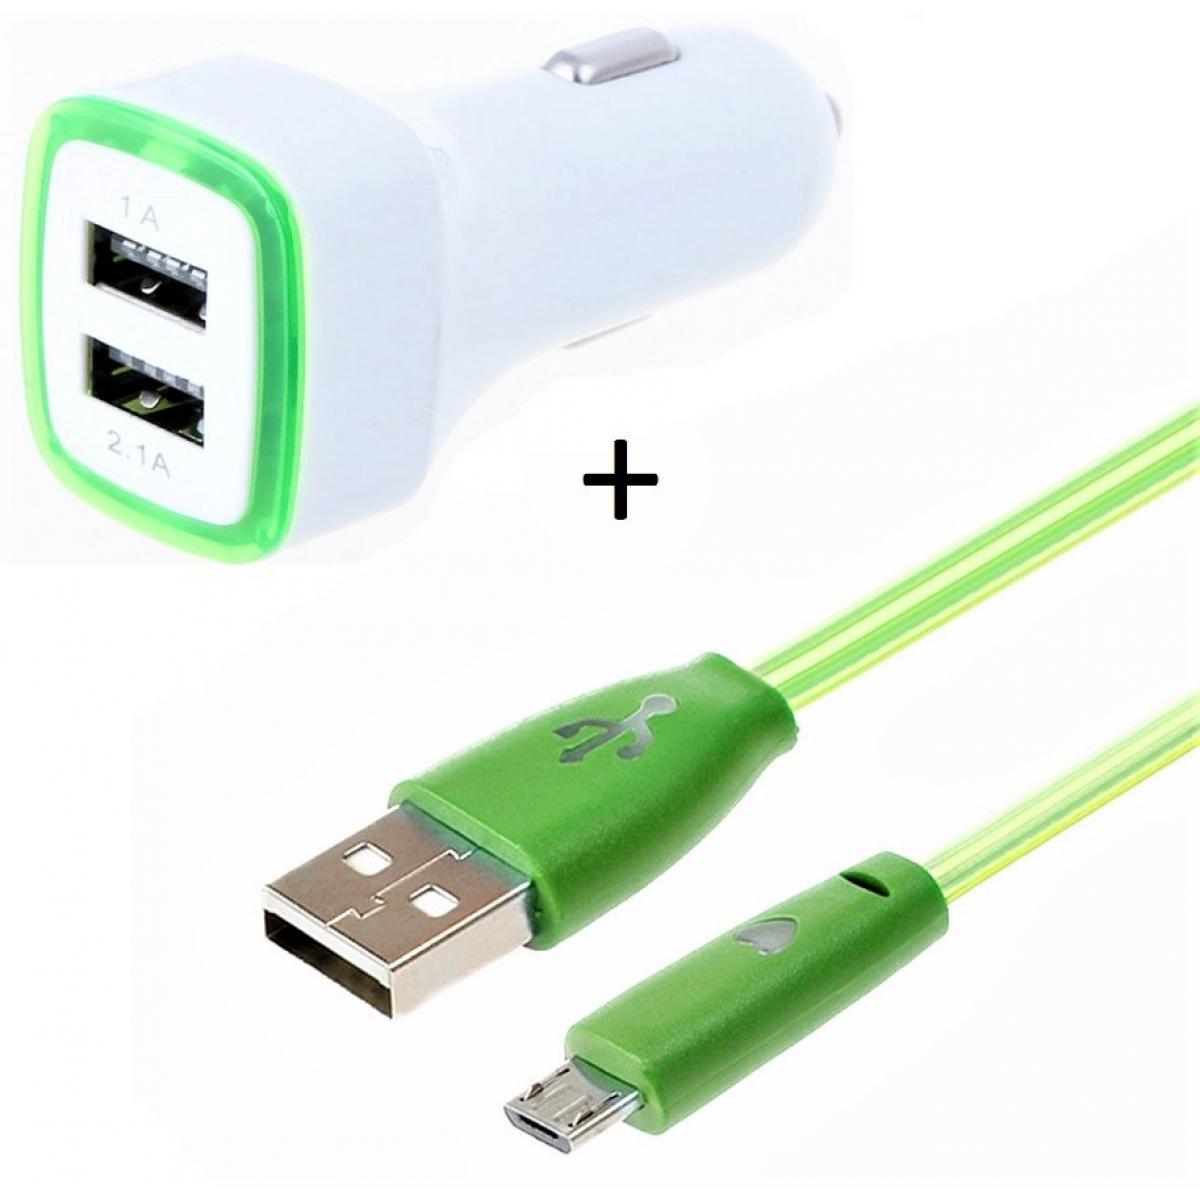 Shot - Pack Chargeur Voiture pour "IPHONE 12 Mini" Lightning (Cable Smiley + Double Adaptateur LED Allume Cigare) (VERT) - Chargeur Voiture 12V